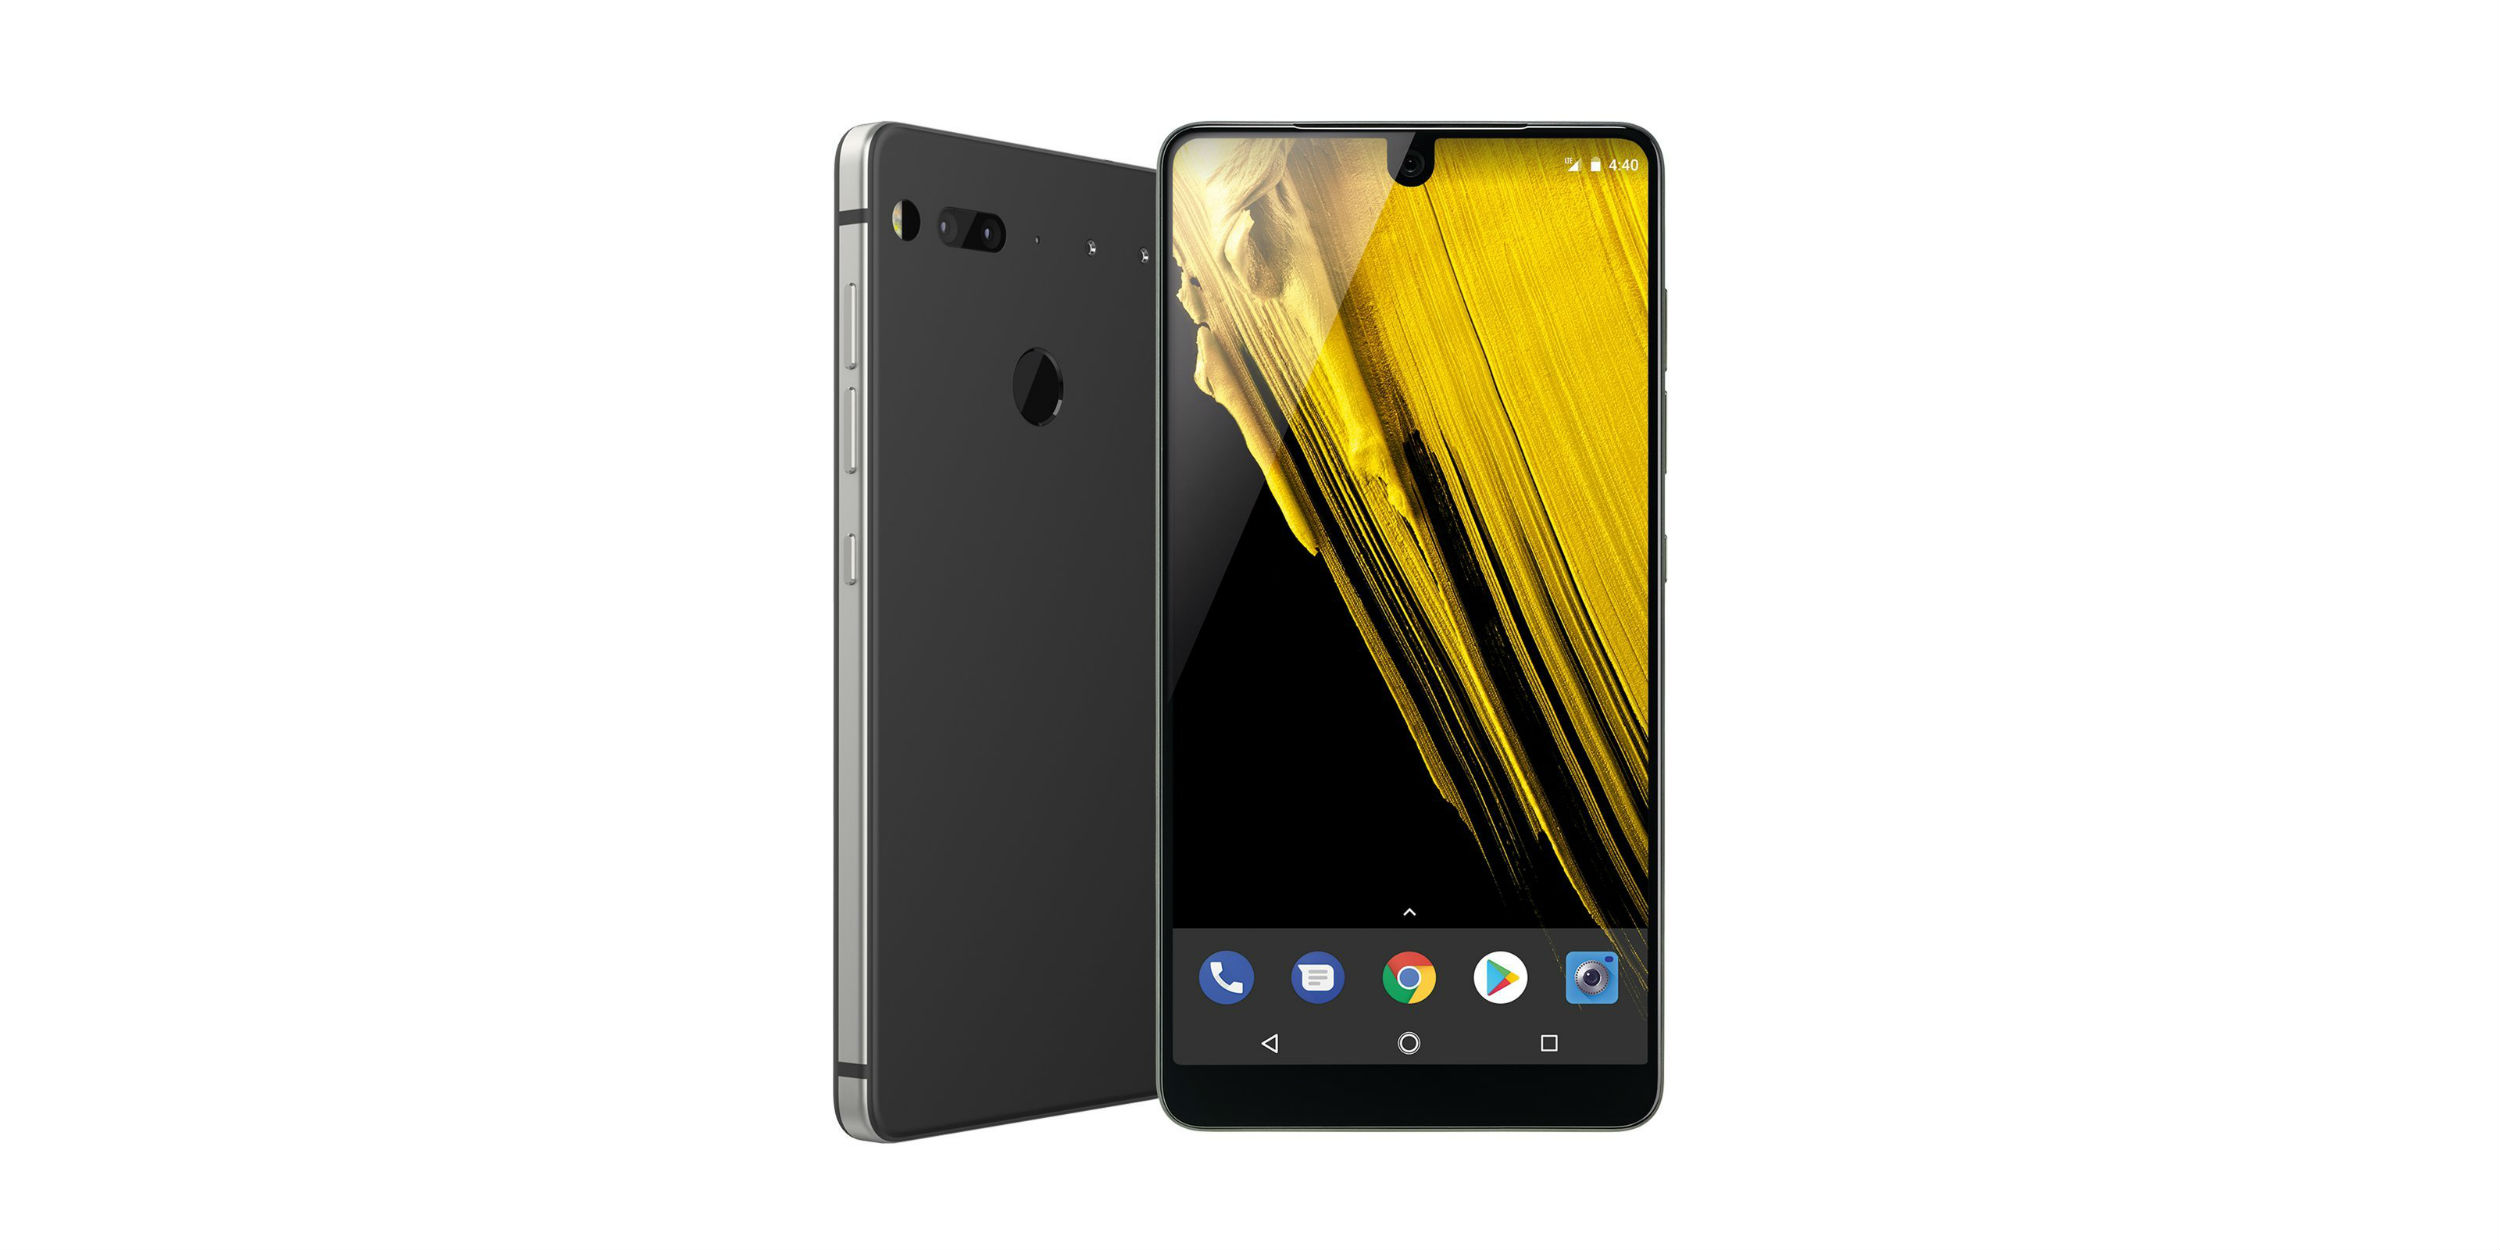 Essential Phone in 'Halo Gray' lands on Amazon for $449 w/ Alexa 